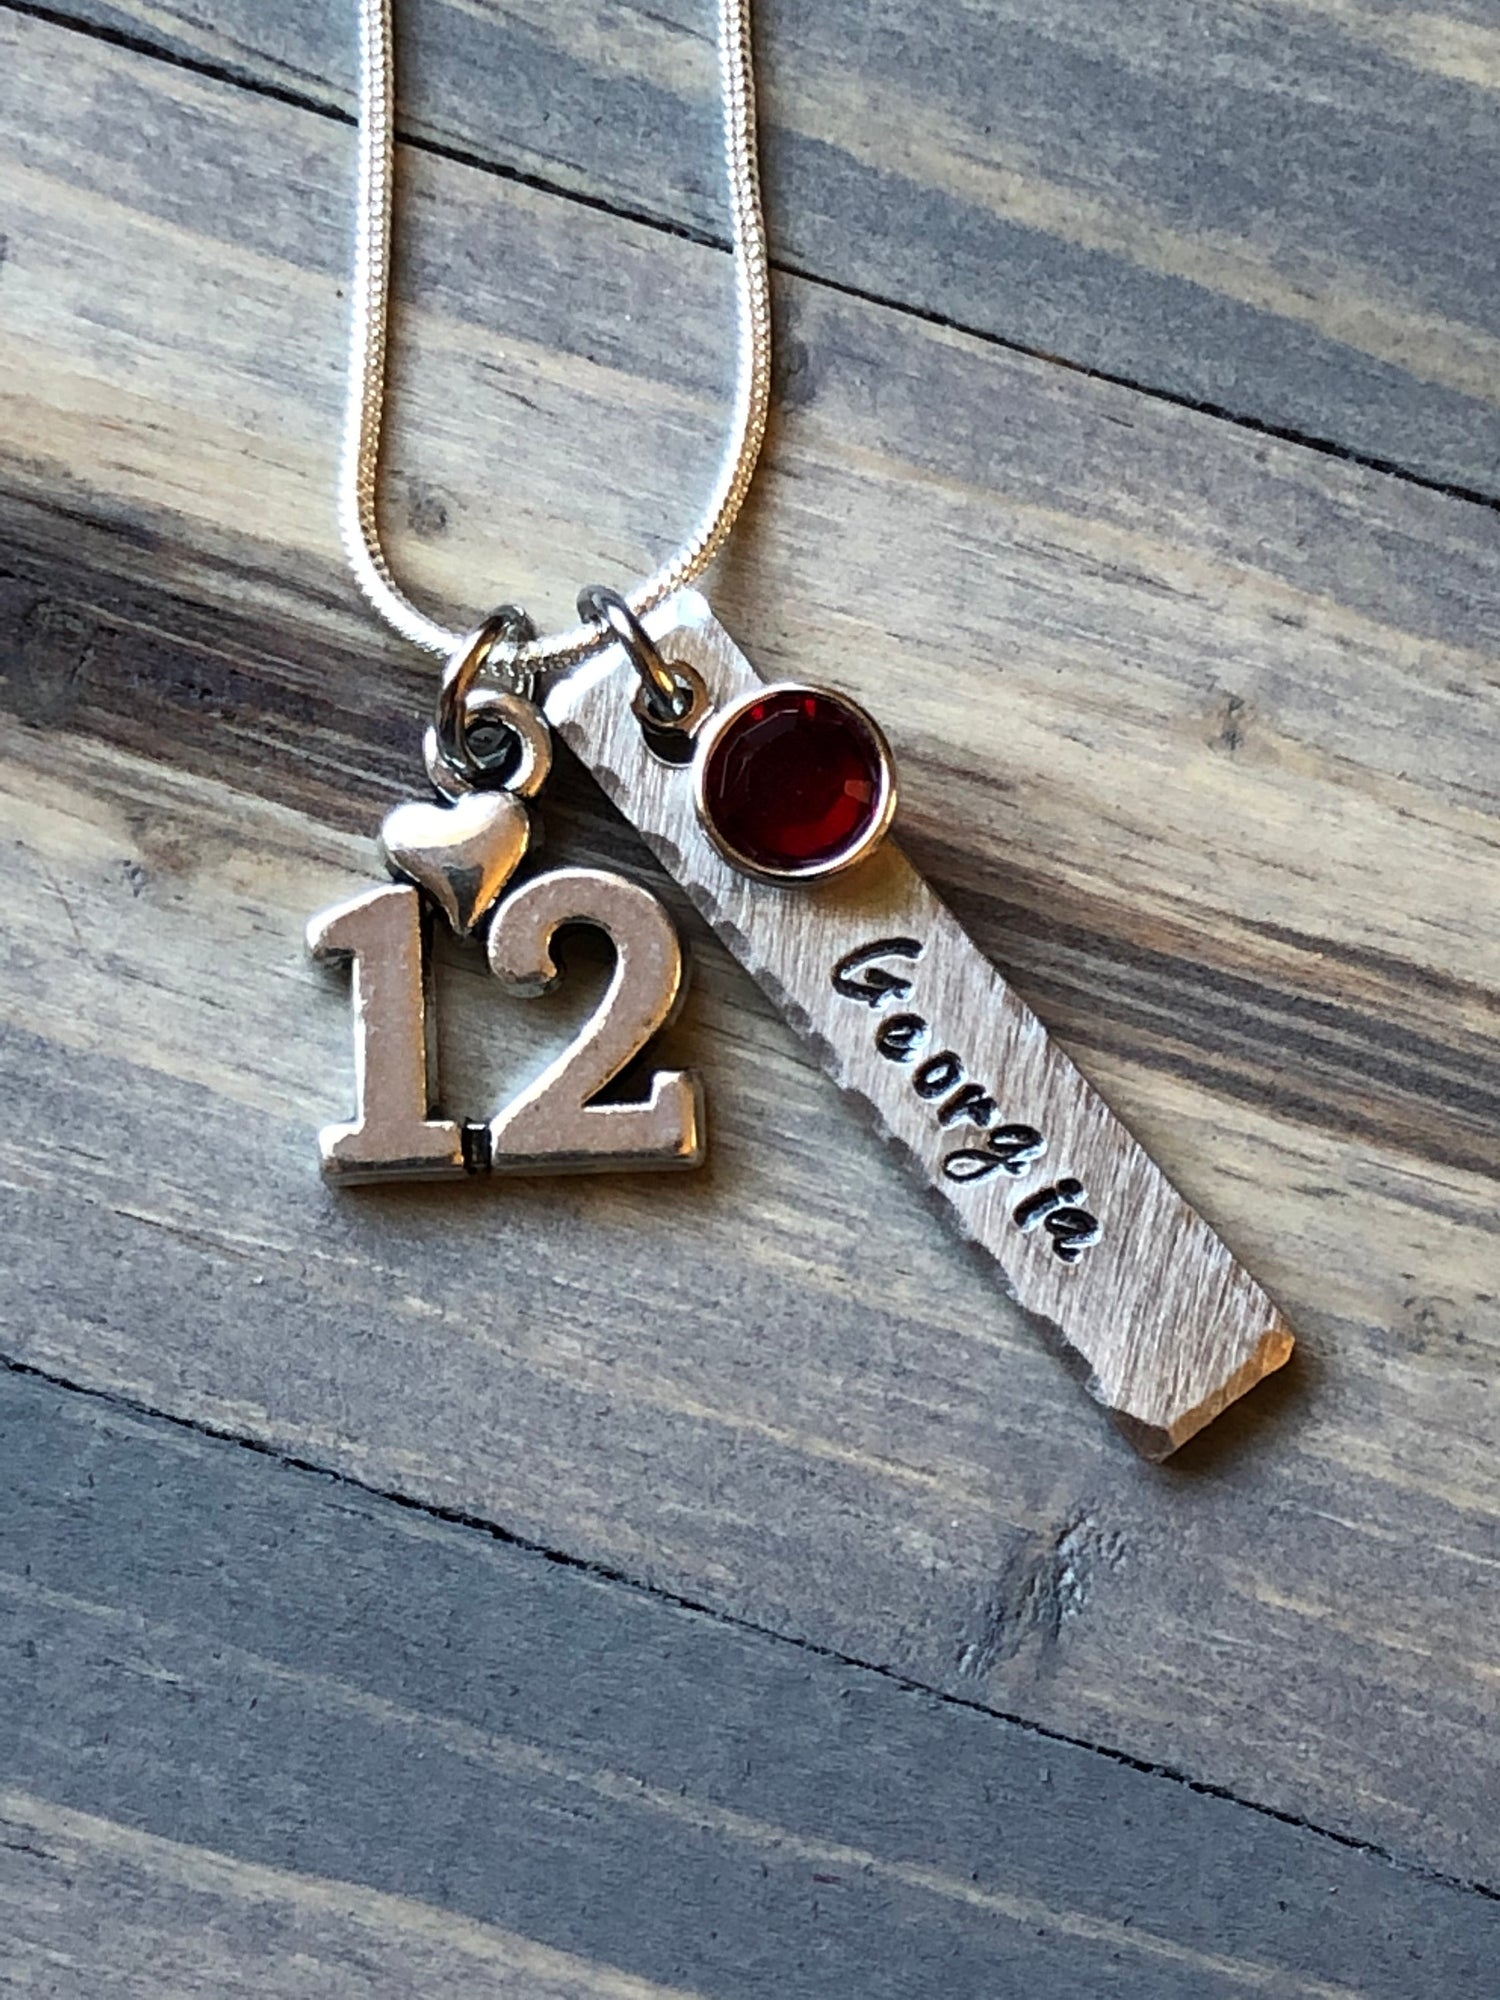 13th Birthday Necklace, Gift for Girl, Personalized Necklace, Birthstone Necklace, Gift for Girl&#39;s 13th birday, Turning 13, Add a Charm